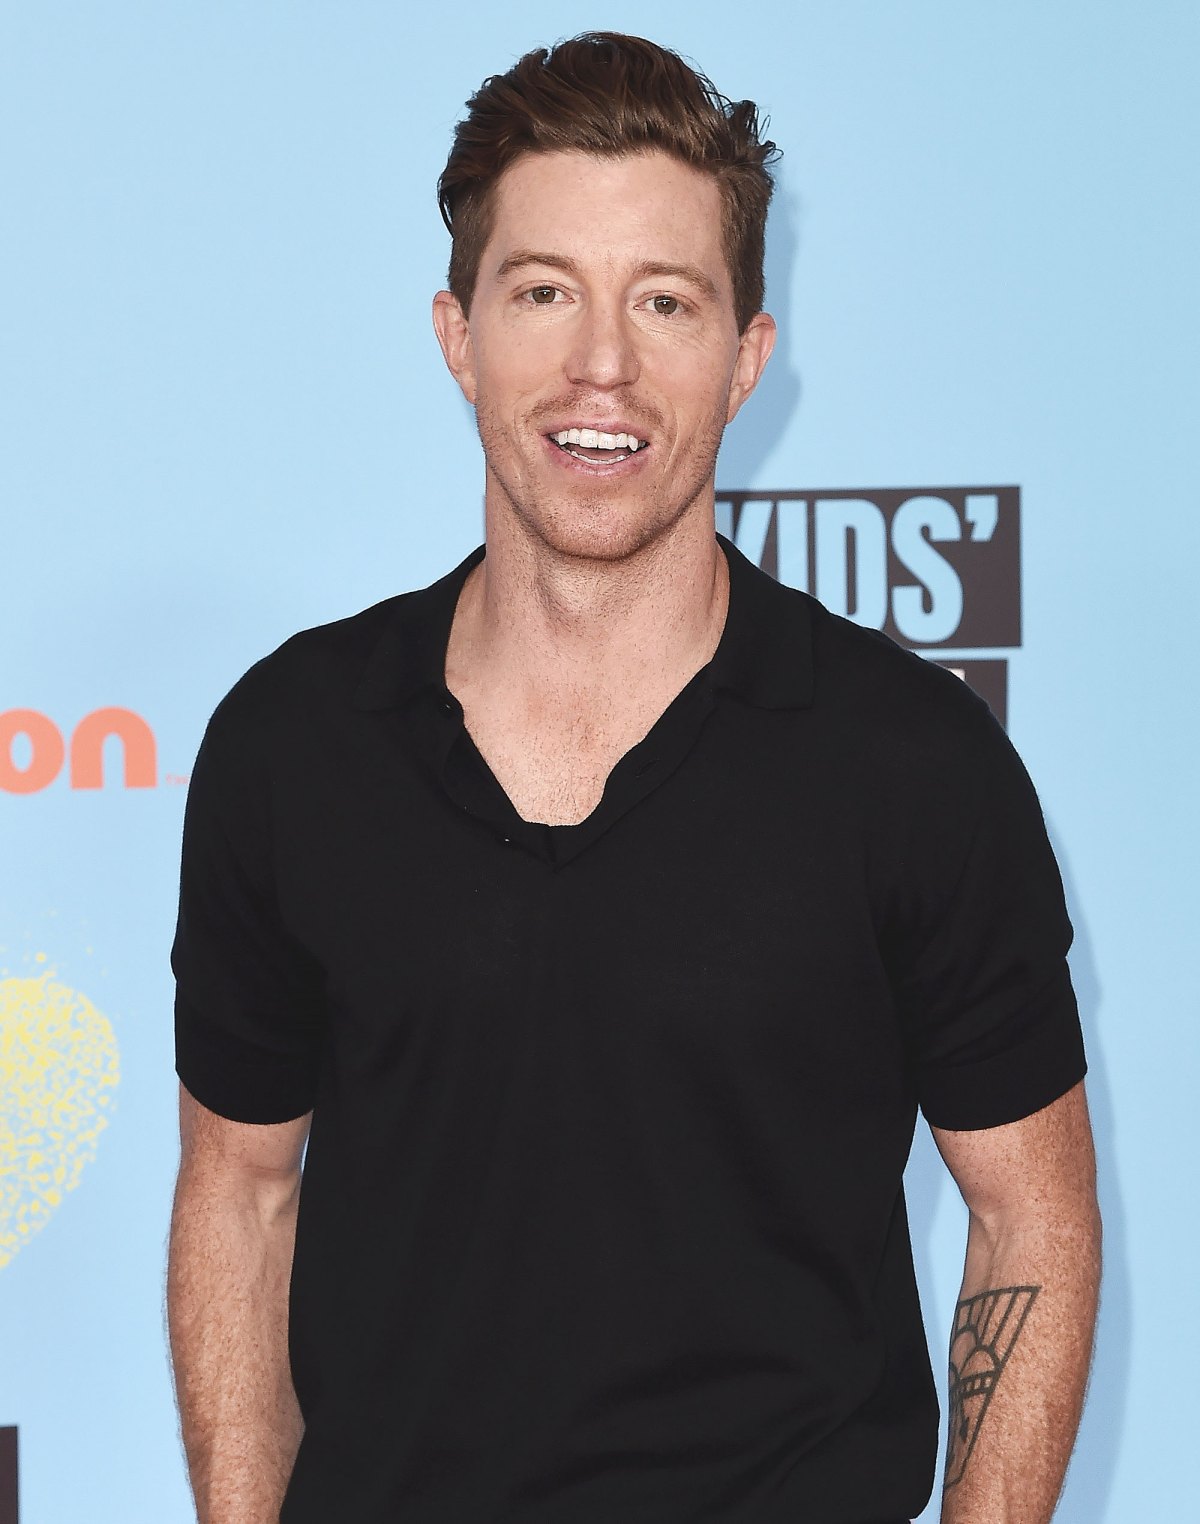 Shaun White now has a new hair color